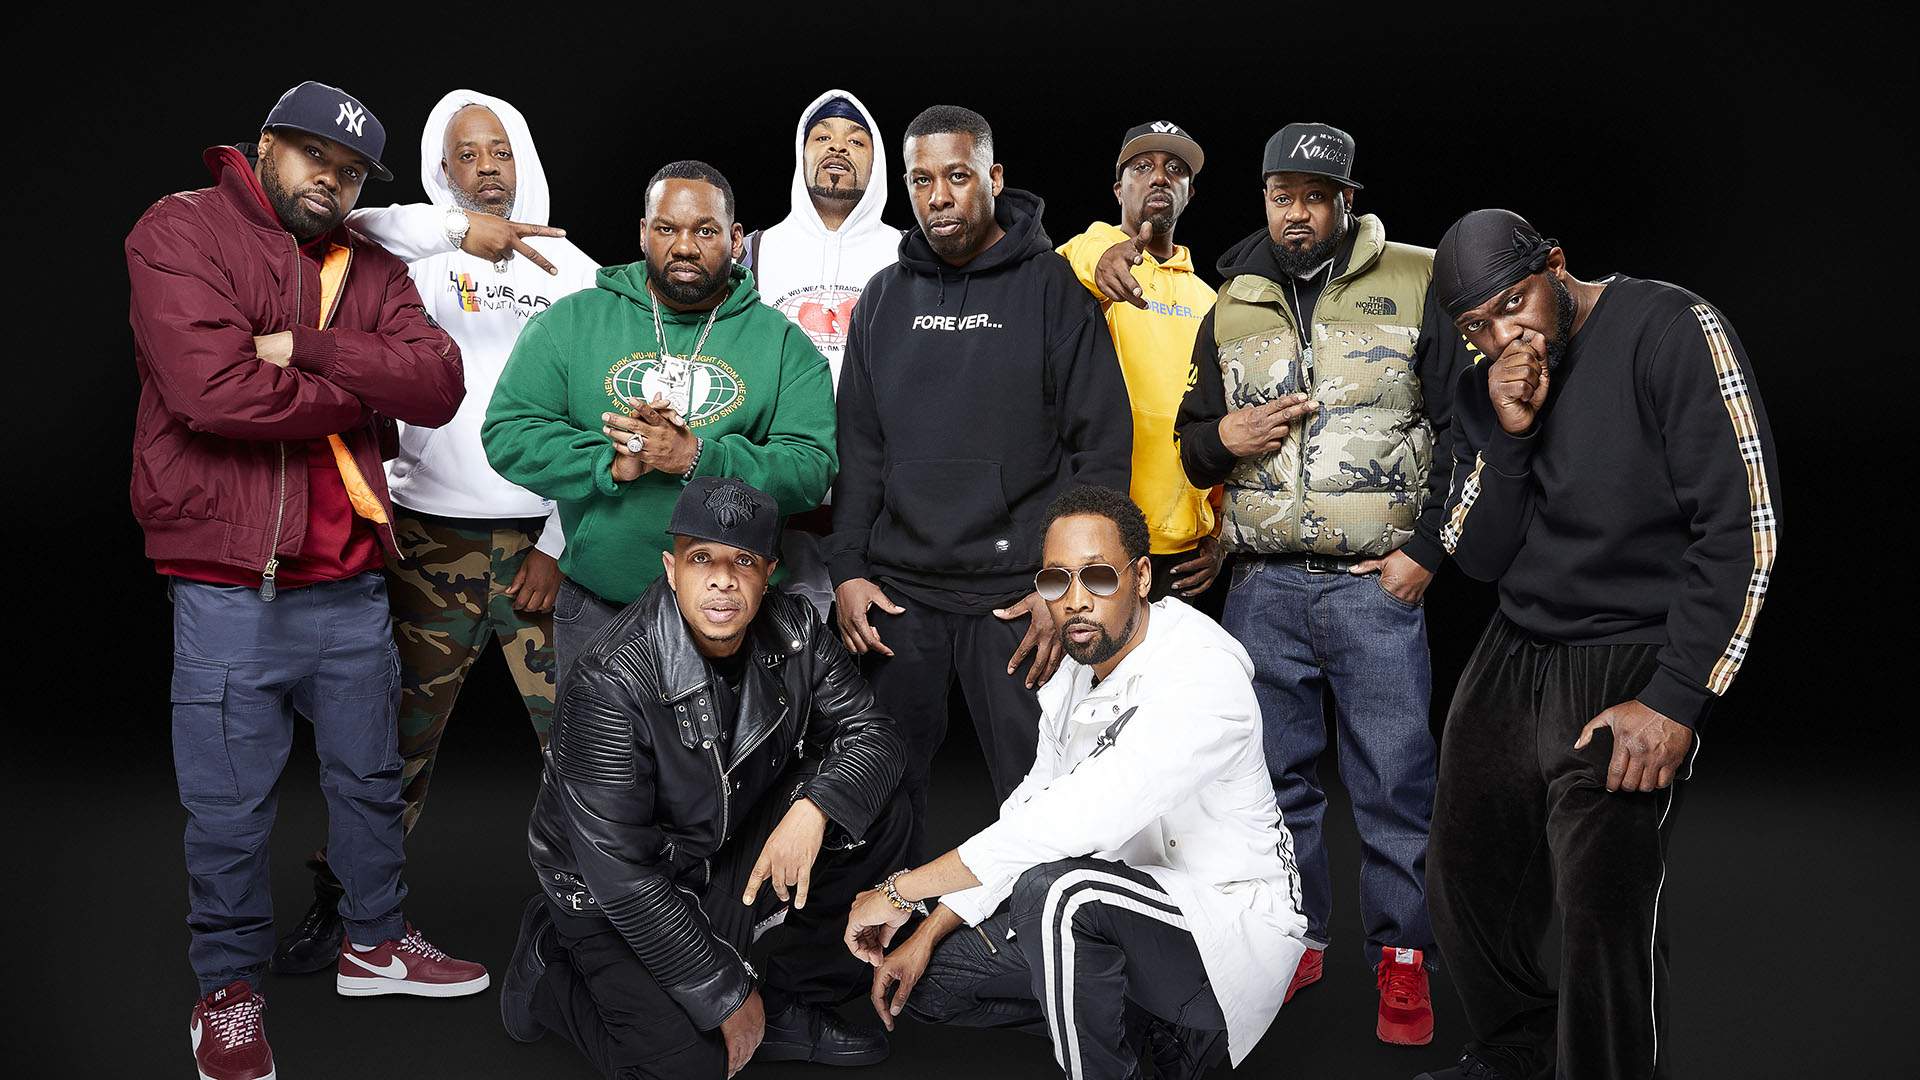 Wu-Tang Clan and Nas Are Bringing Their Huge World Tour Down Under This Autumn